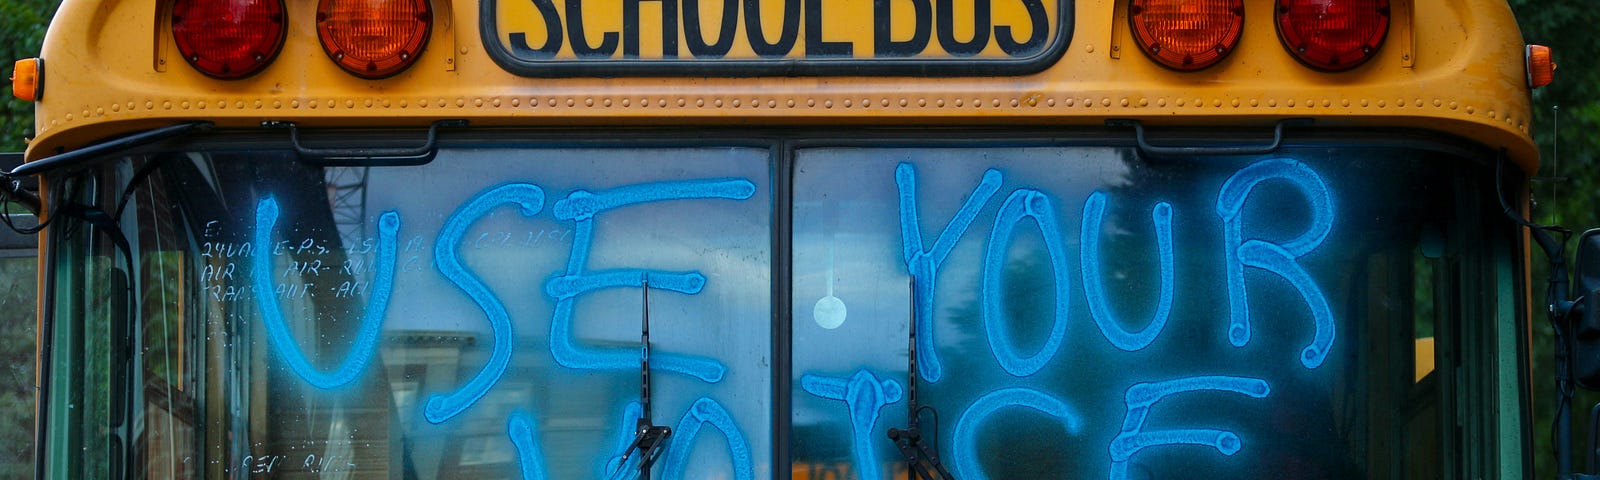 yellow school bus, protest, voice your convictions